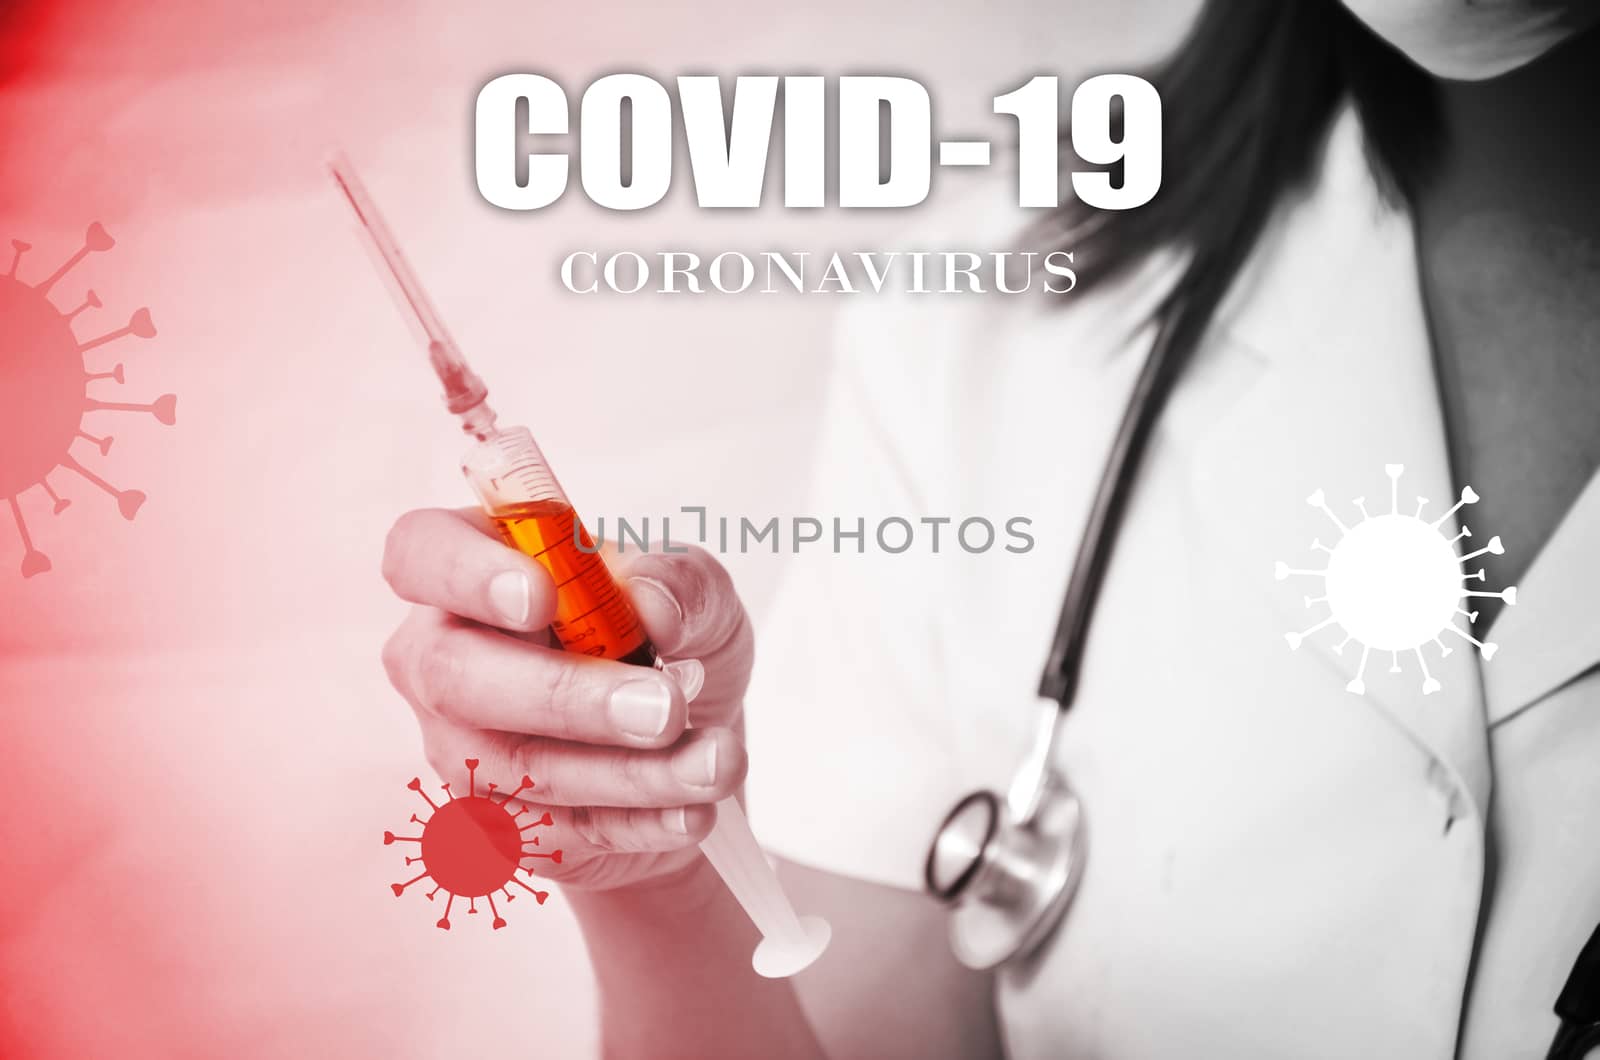 Vaccine and syringe injection. COVID-19 infectious concept. by jengit